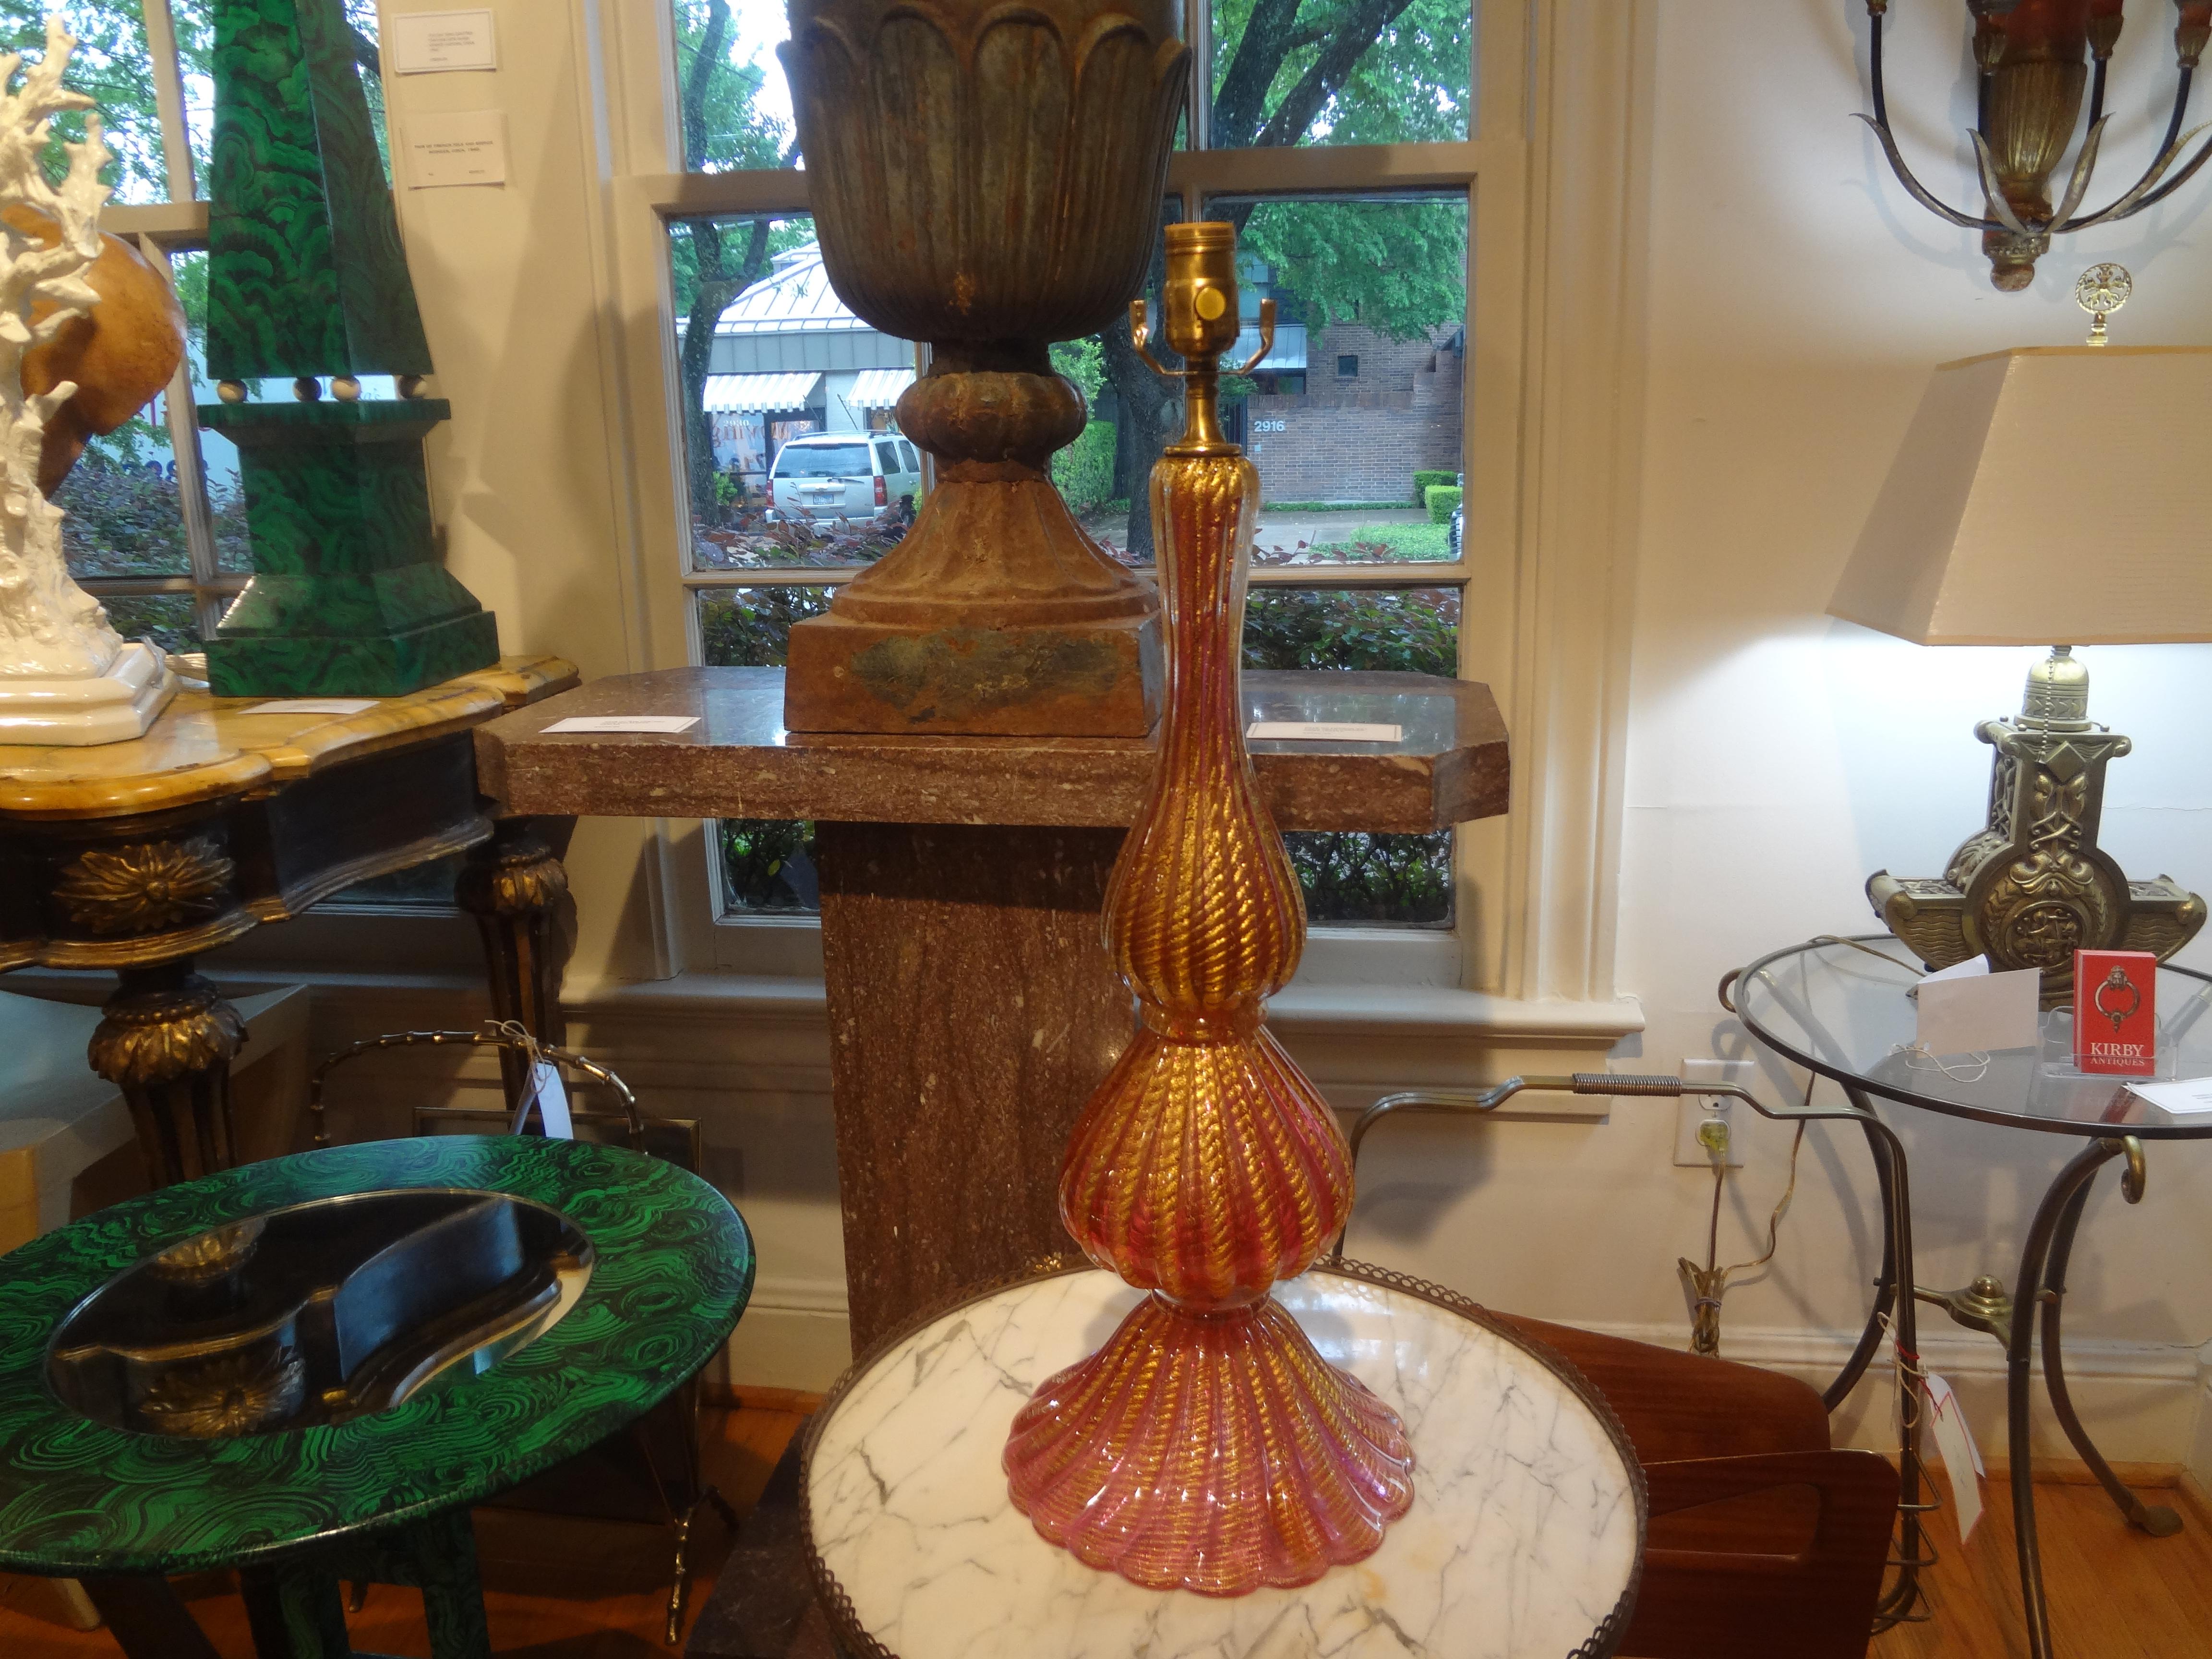 Murano glass table lamp by Seguso.
This stunning vintage tall Murano glass lamp was hand blown in a gorgeous raspberry colored glass with loads of infused gold flecks. Our shapely Murano lamp has been newly wired with a new socket for the U.S.